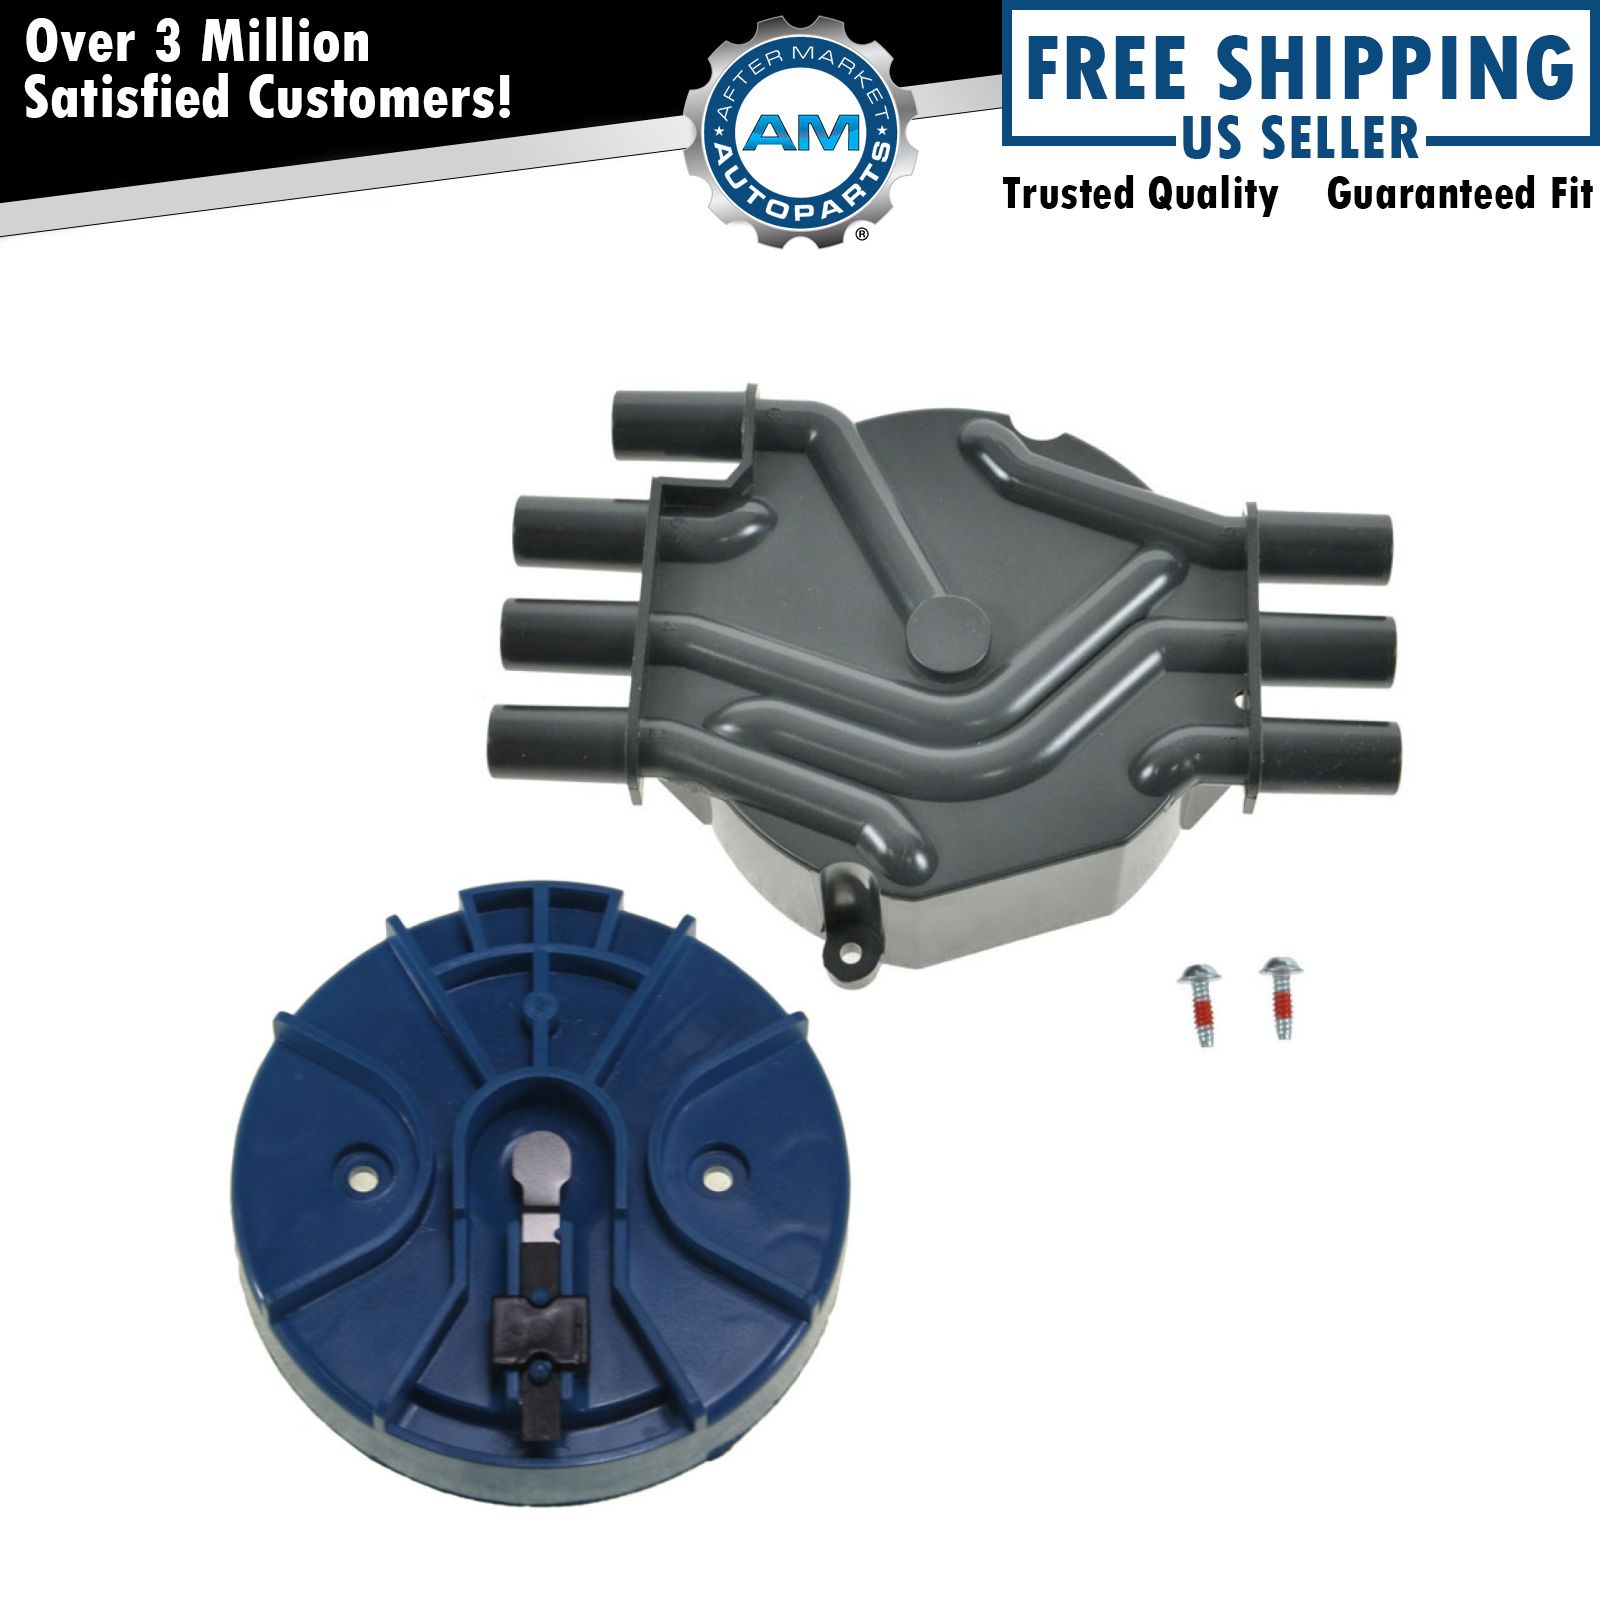 Distributor Cap and Rotor Kit Set for 94-08 Chevy GMC Isuzu Olds V6 4.3